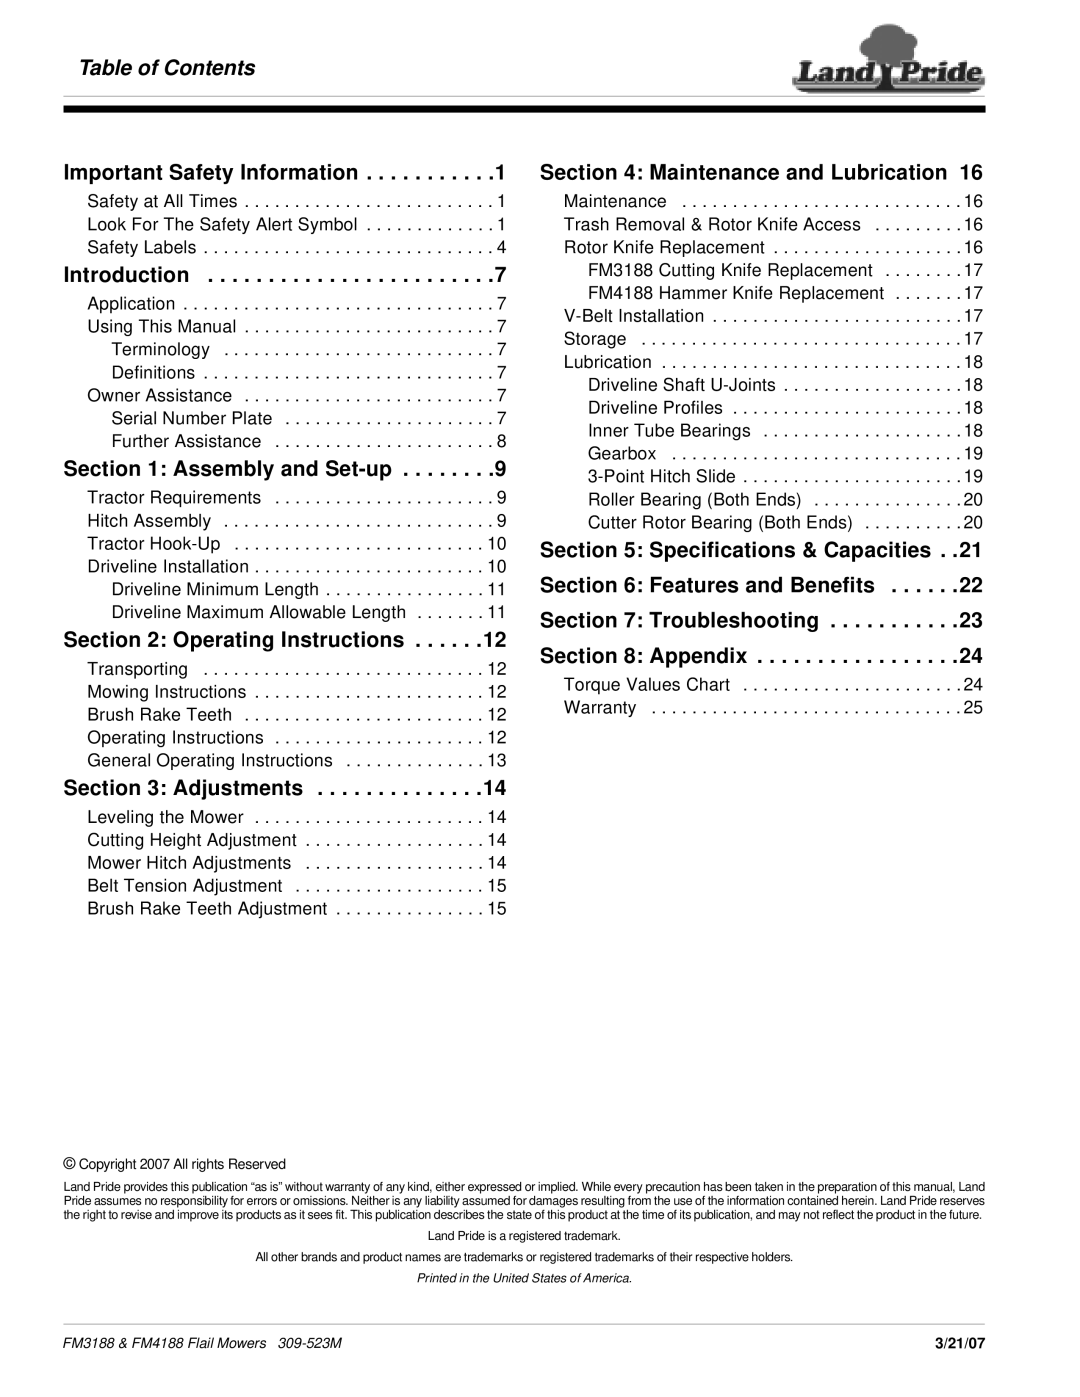 Land Pride FM4188, FM3188 manual Table of Contents 